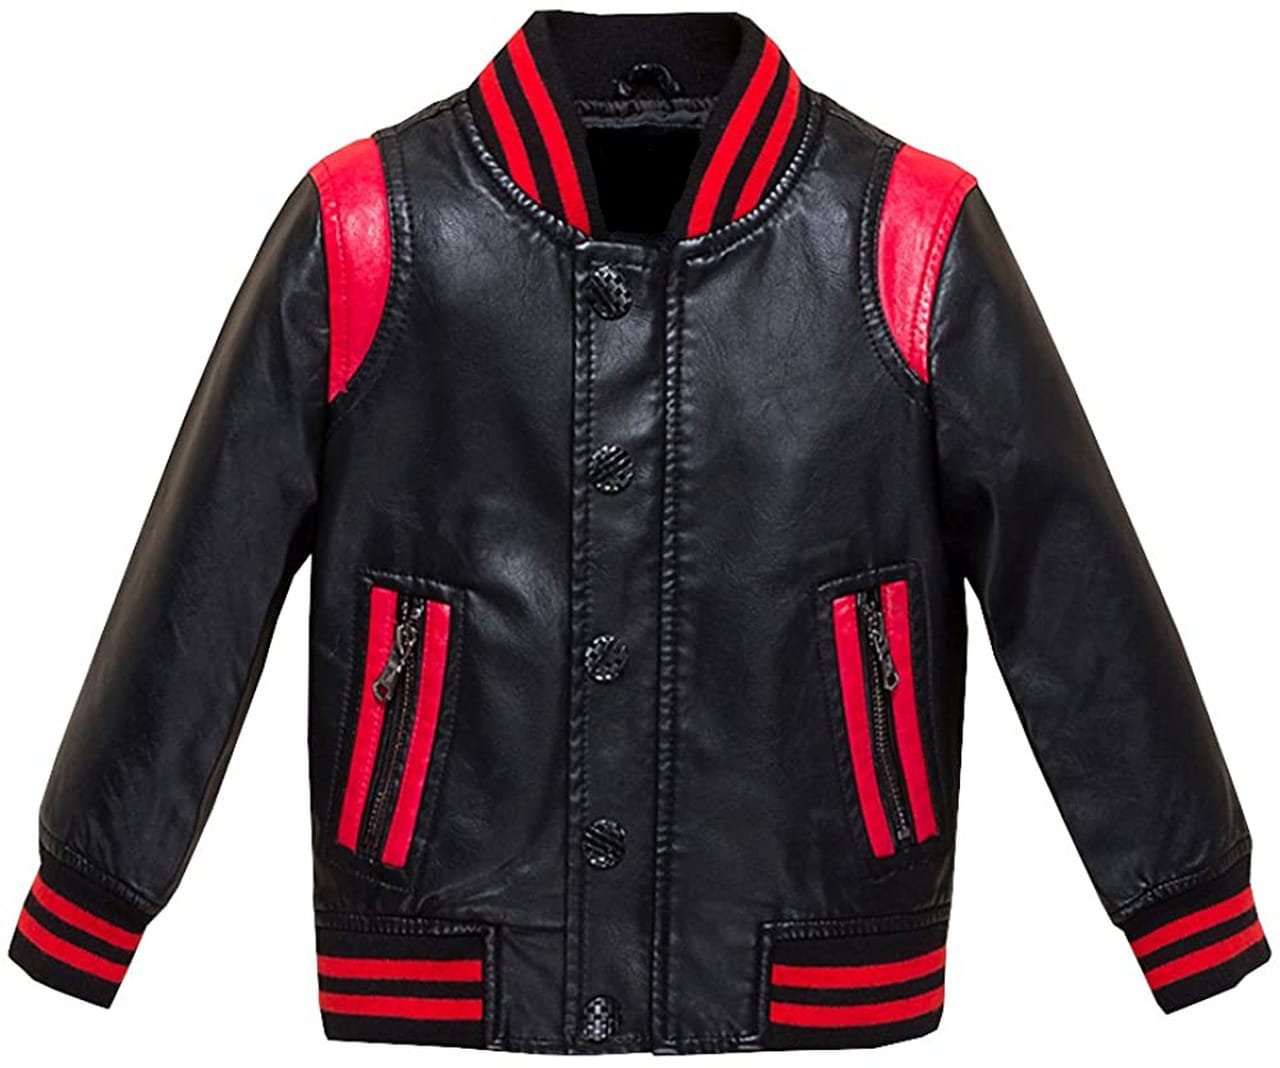 Motorcycle Style Sheepskin Jacket with Red Stripes